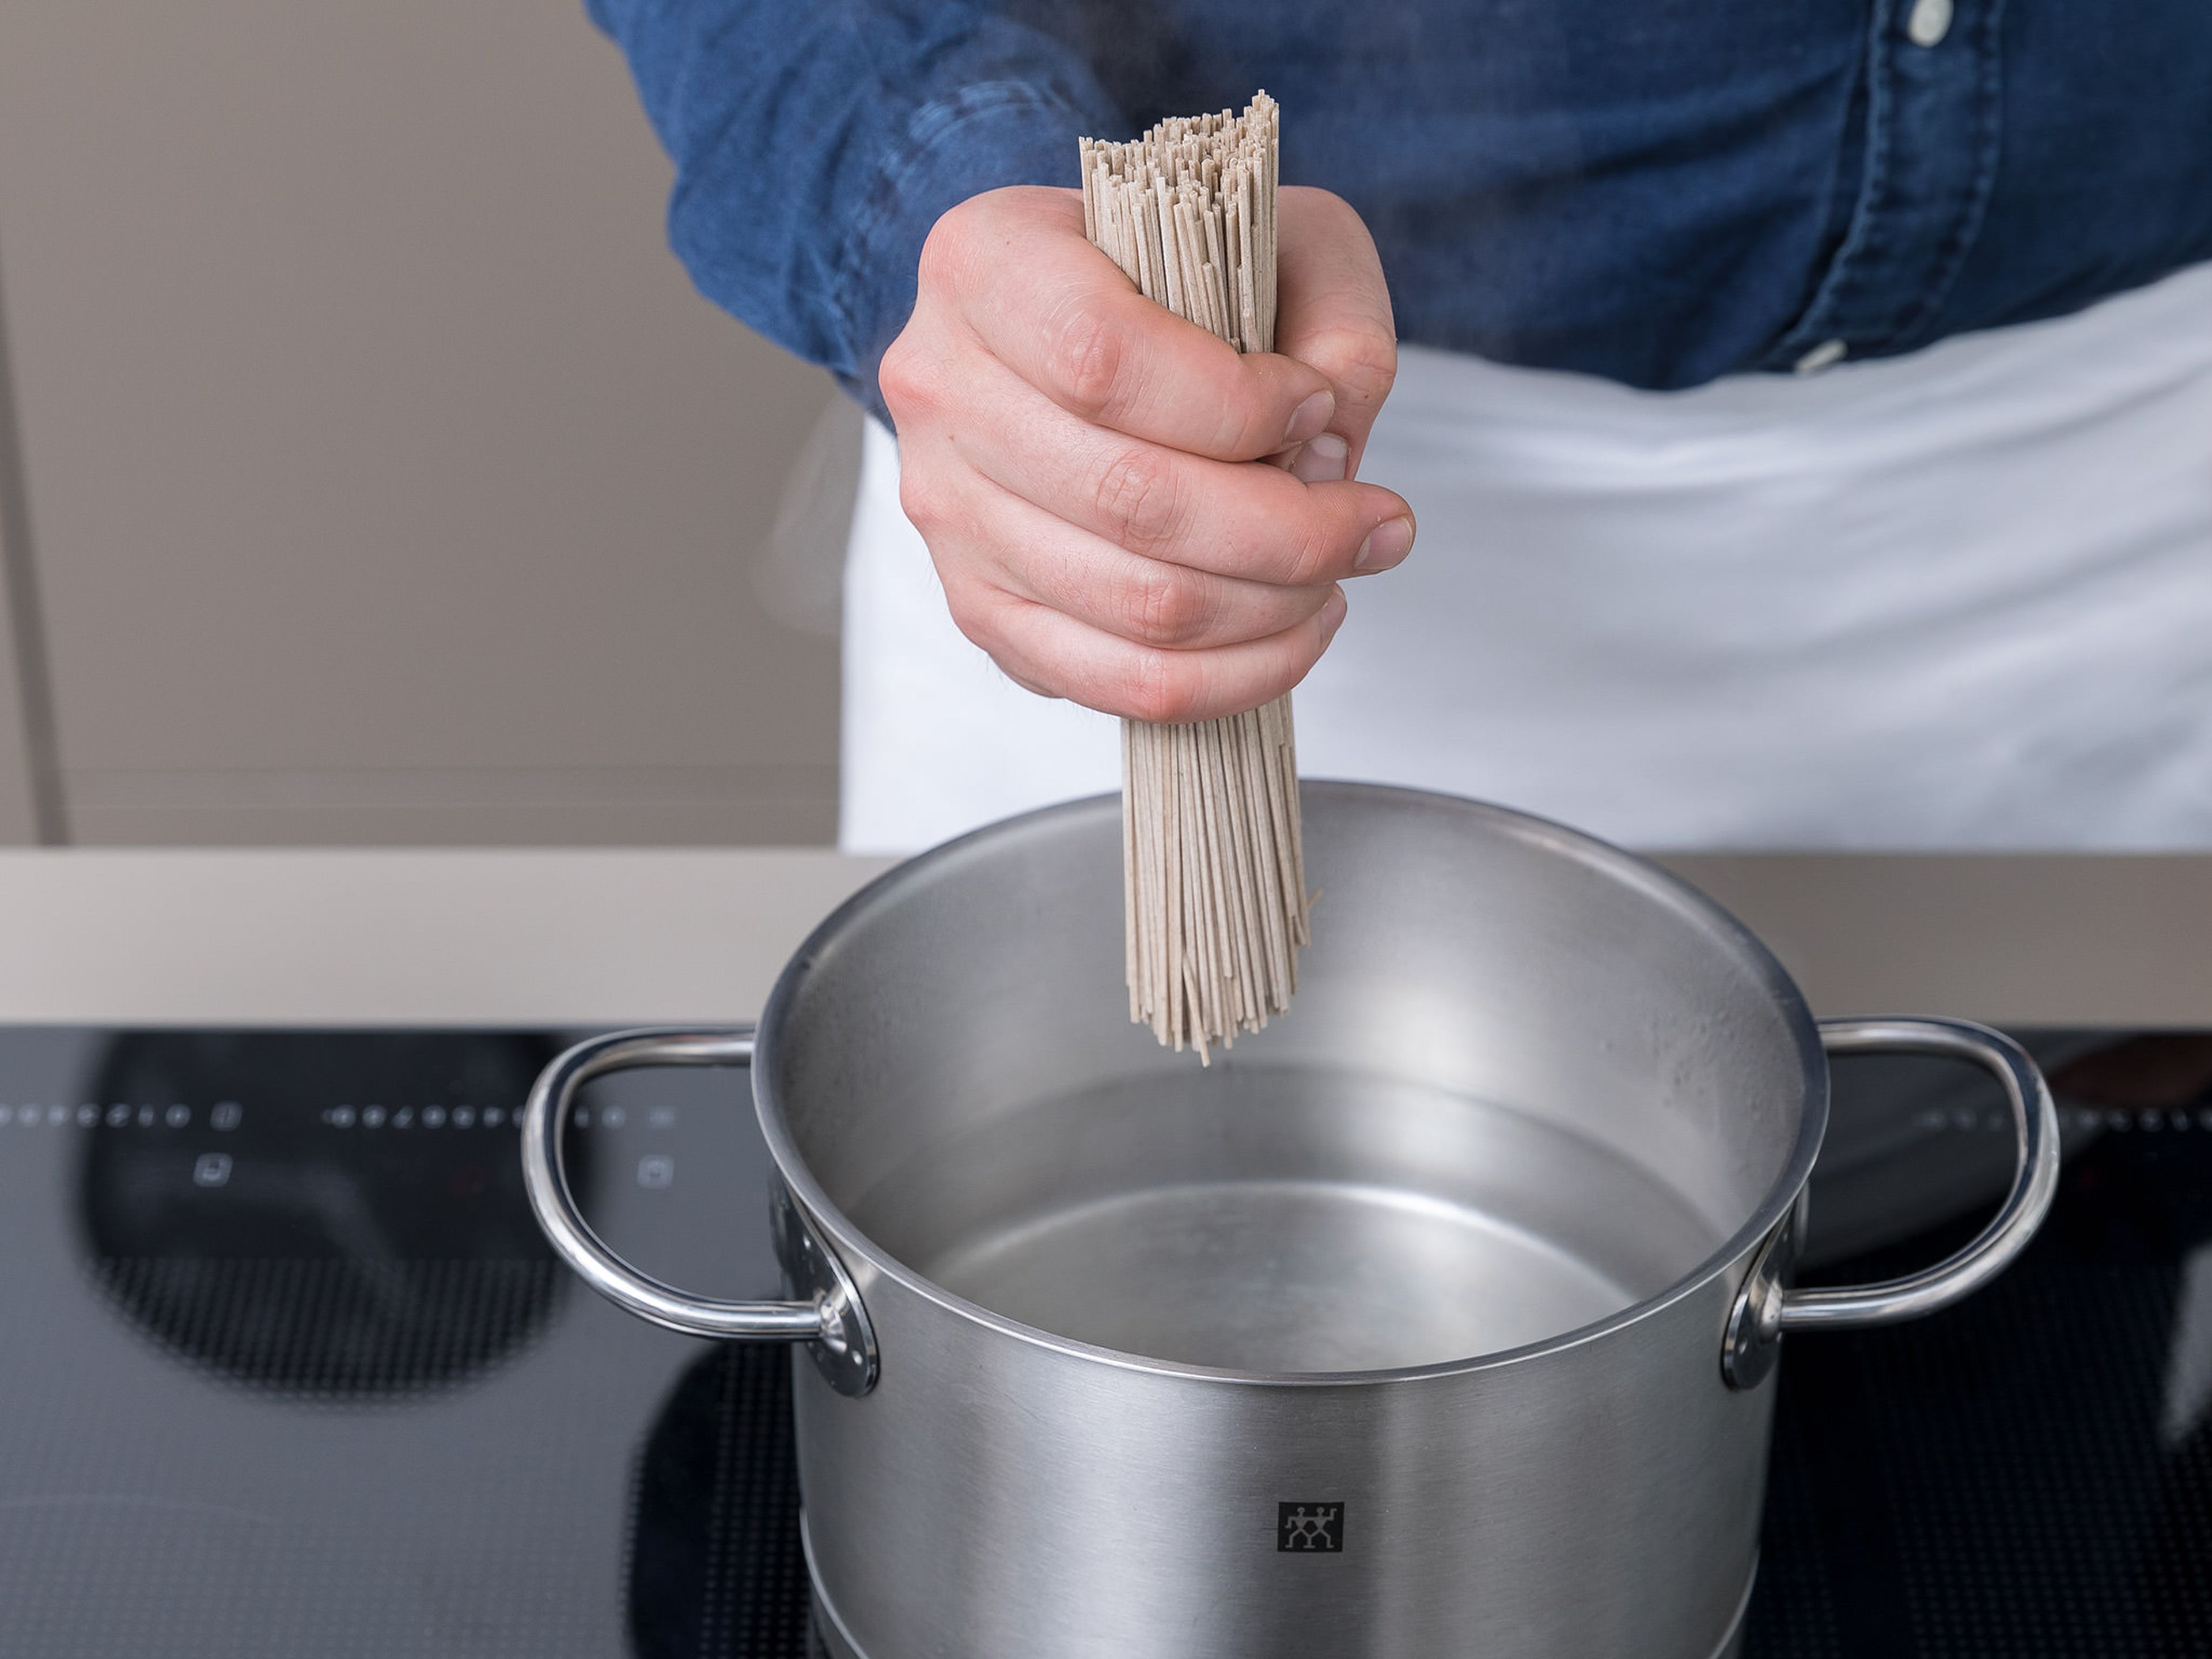 Bring water to a boil in a pot. Cook soba noodles for approx. 3 min. and drain.